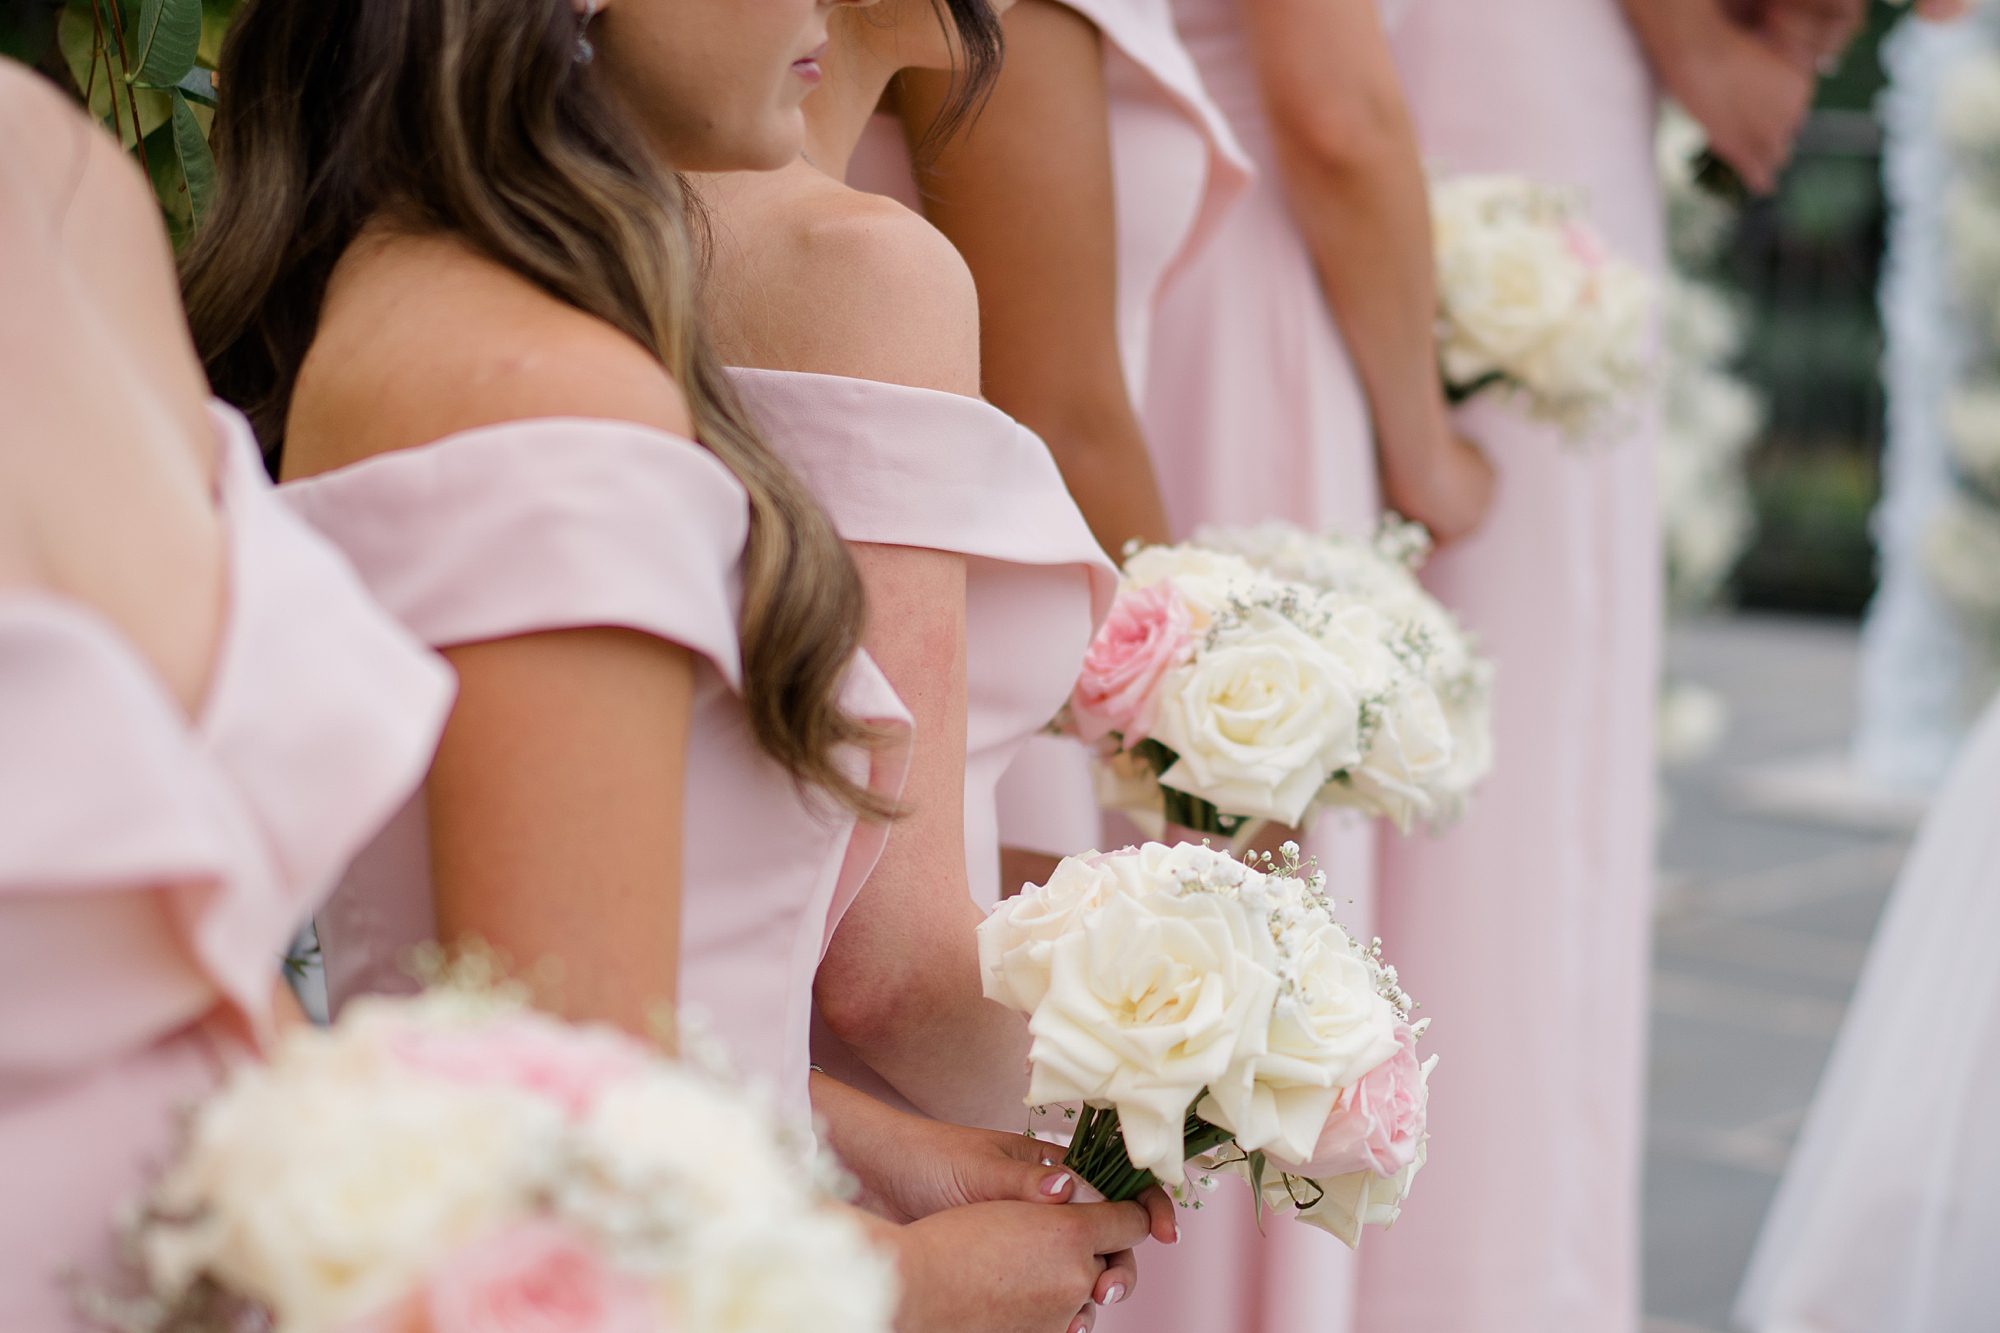 Bridesmaids in romantic pink dresses and white rose bouquets 